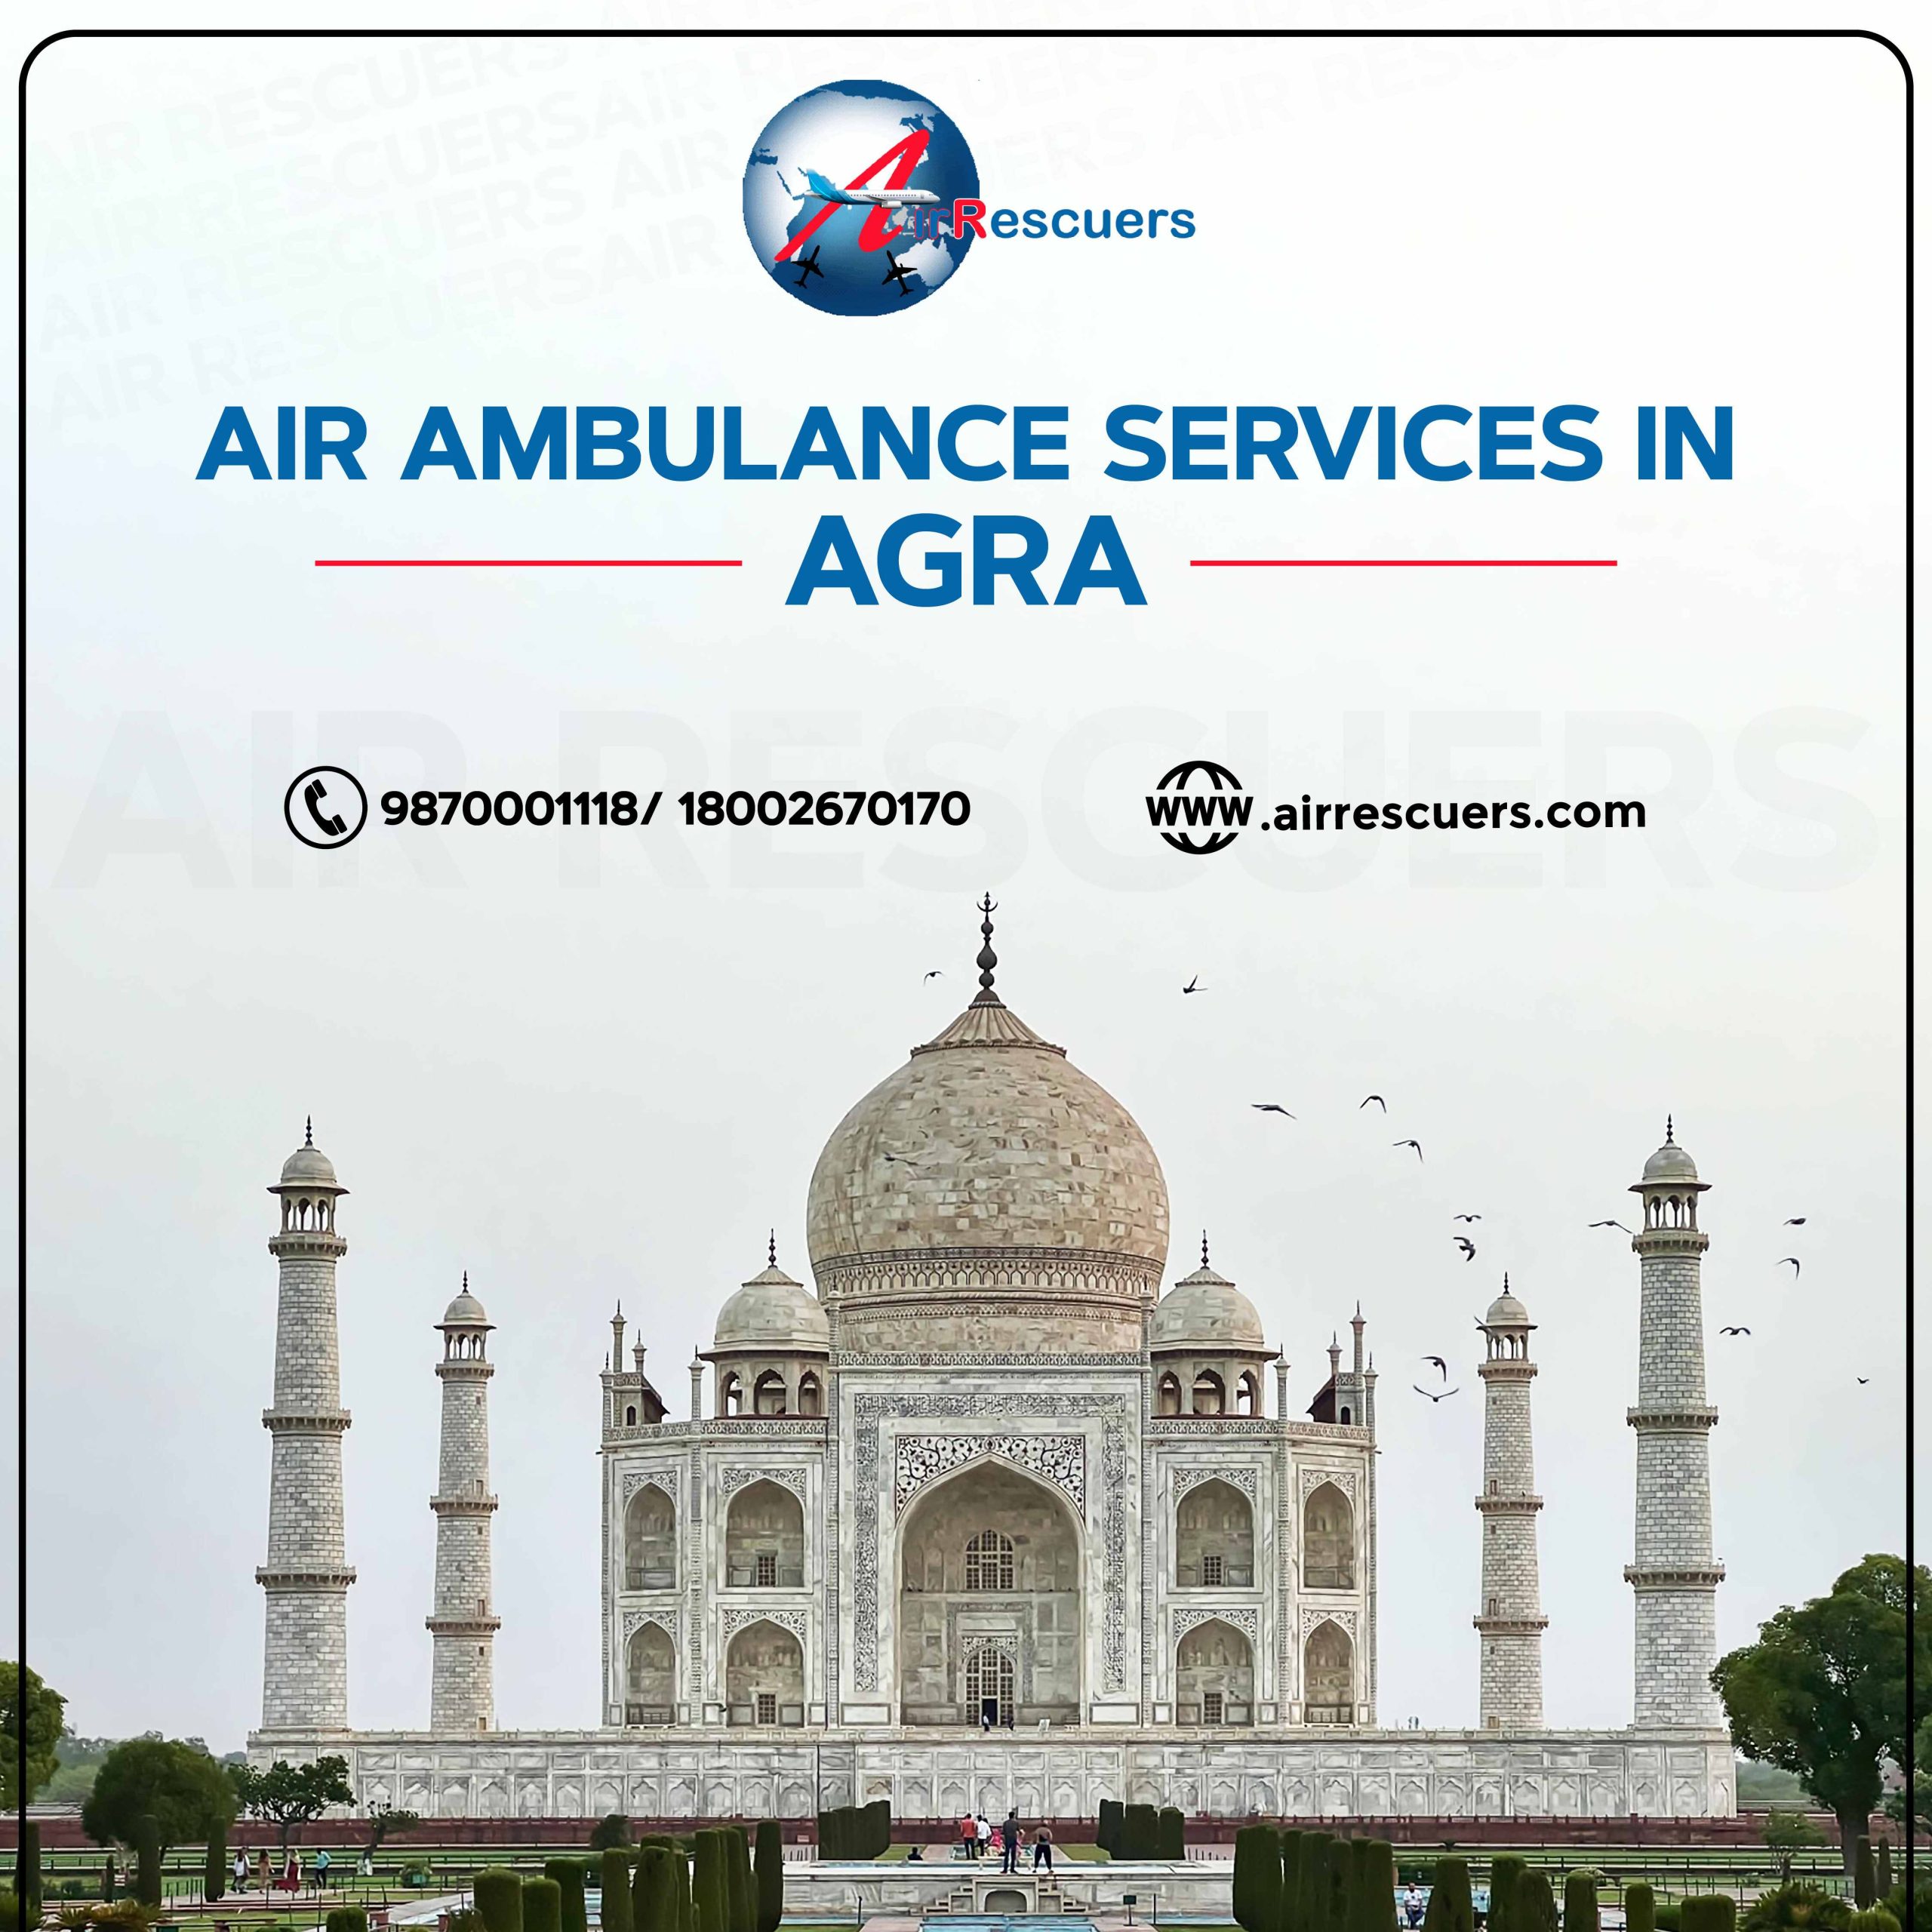 Air Ambulance Services in Agra - Air Rescuers